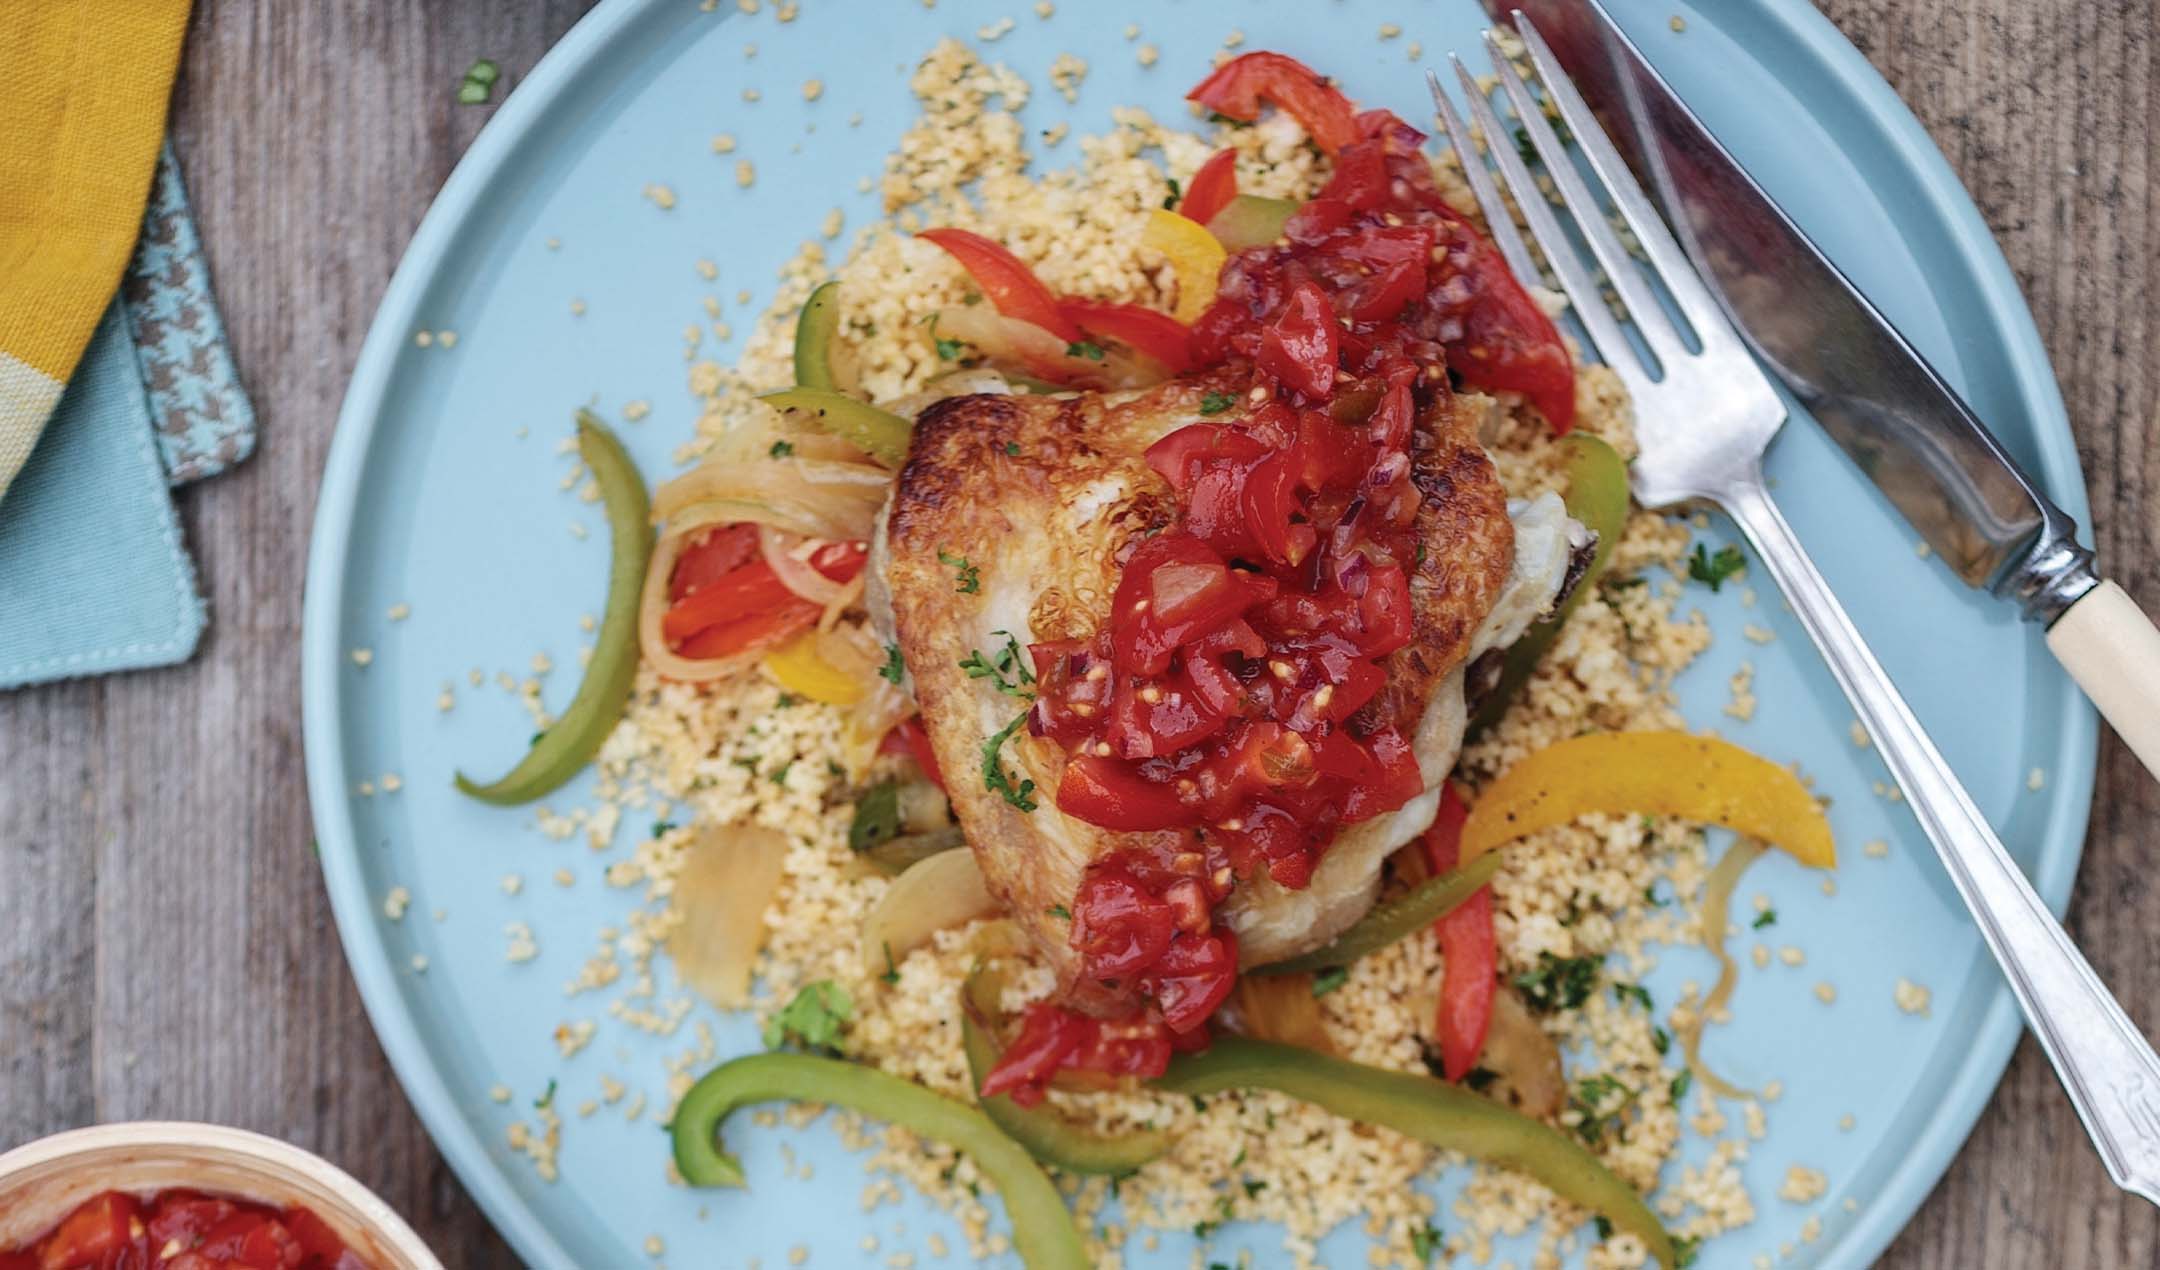 Crispy chicken thighs with peppers and couscous